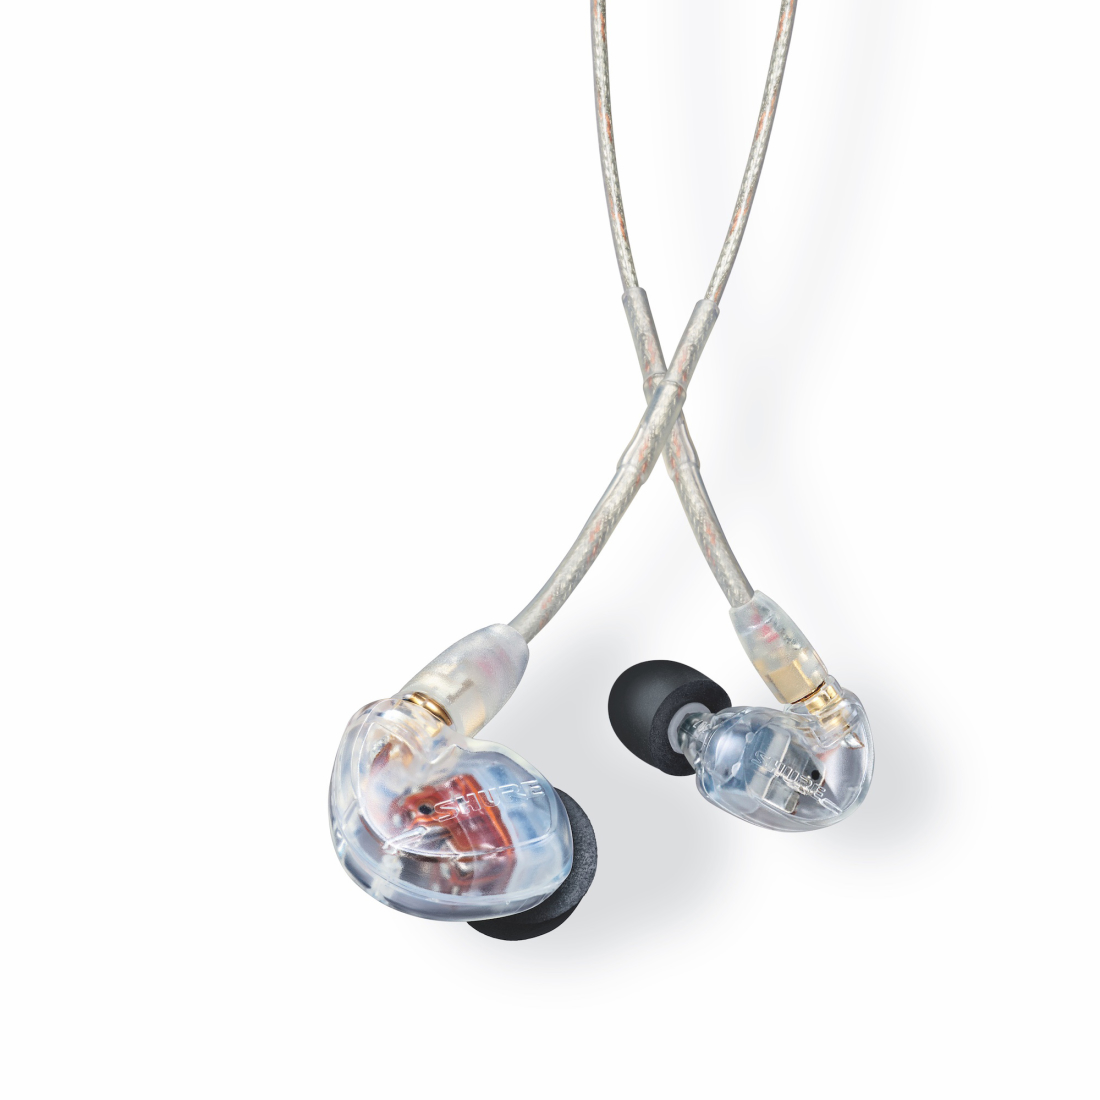 Shure - SE535 - Sound Isolating Earphones - Clear